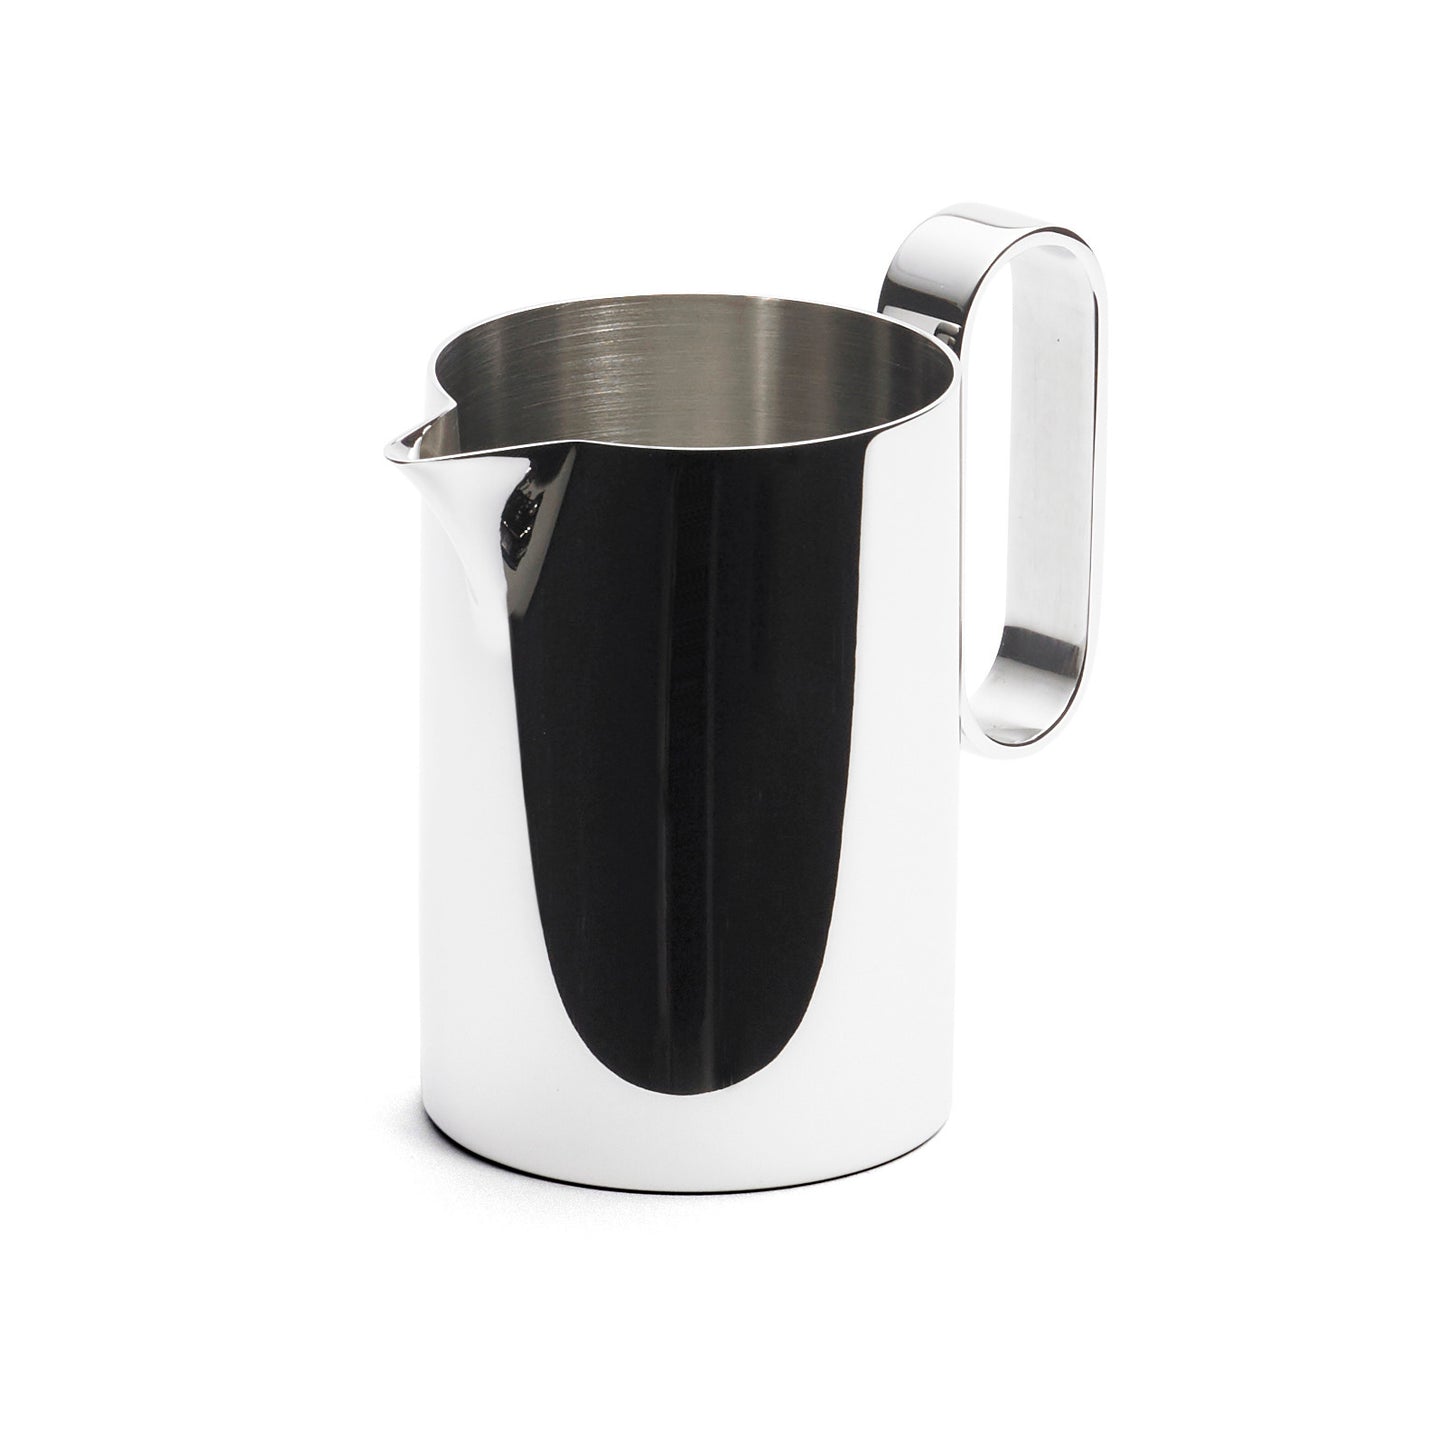 David Mellor: Stainless Steel Creamer with Stainless Handle